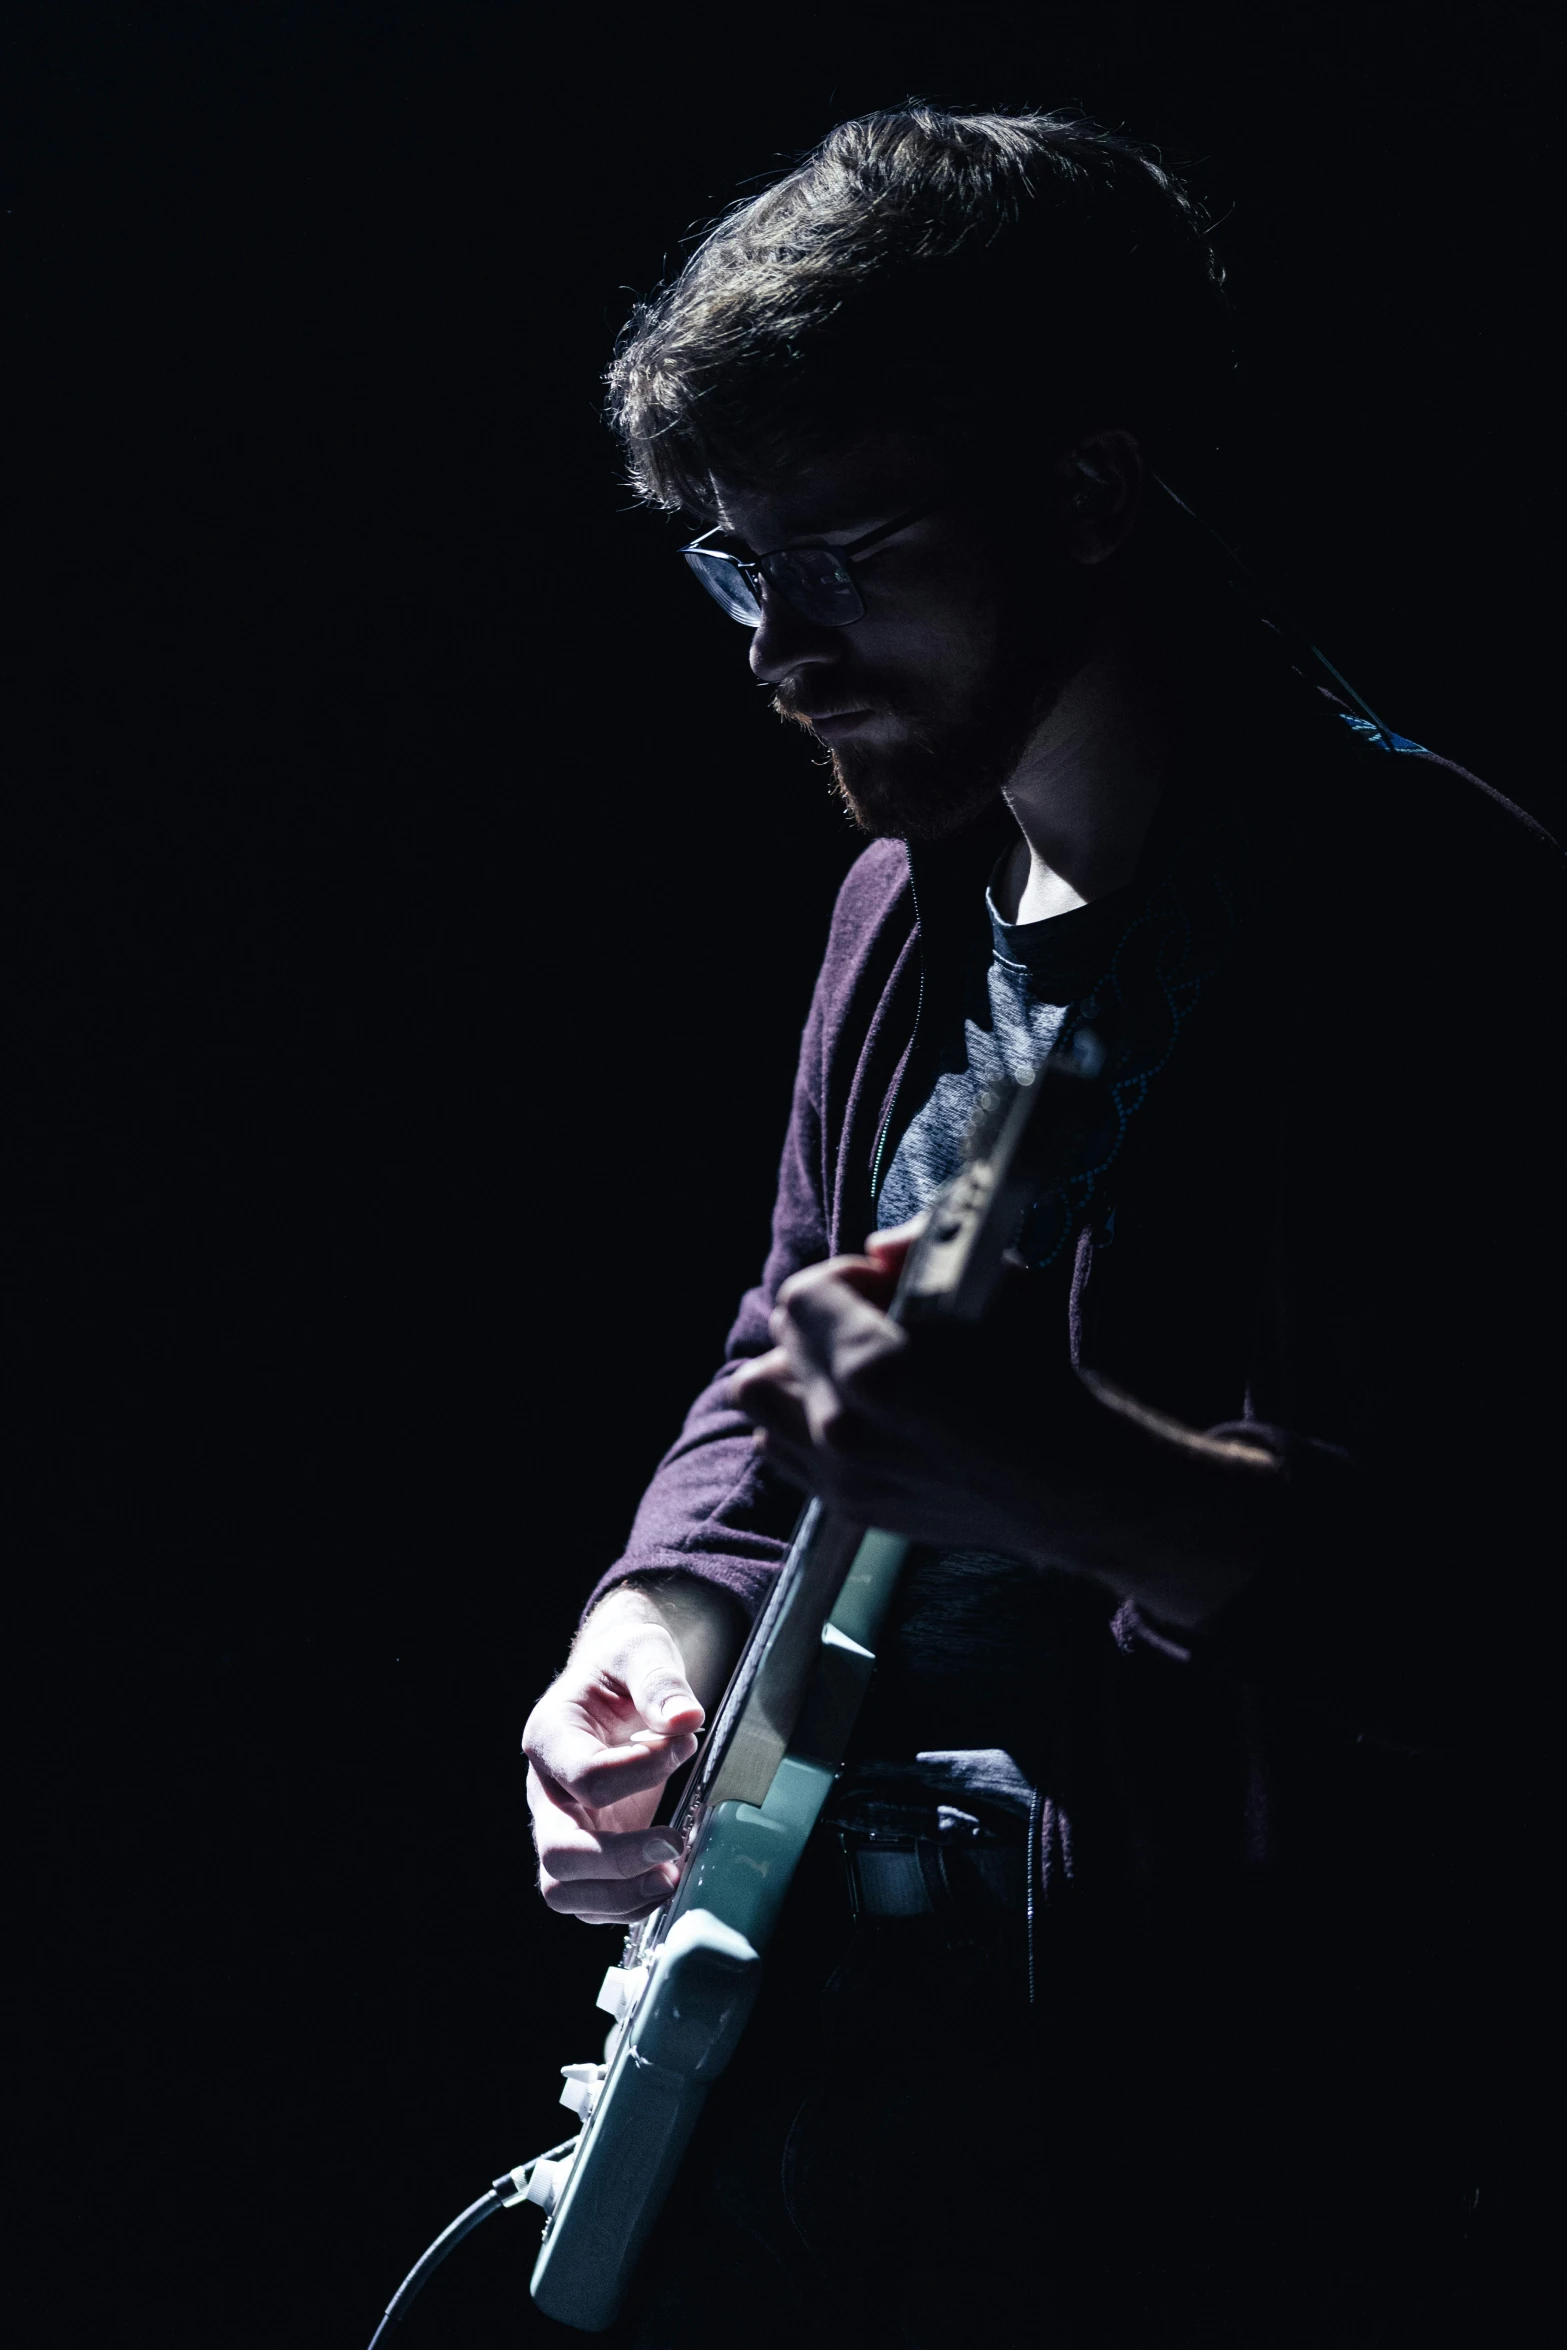 a close up of a person playing guitar in the dark